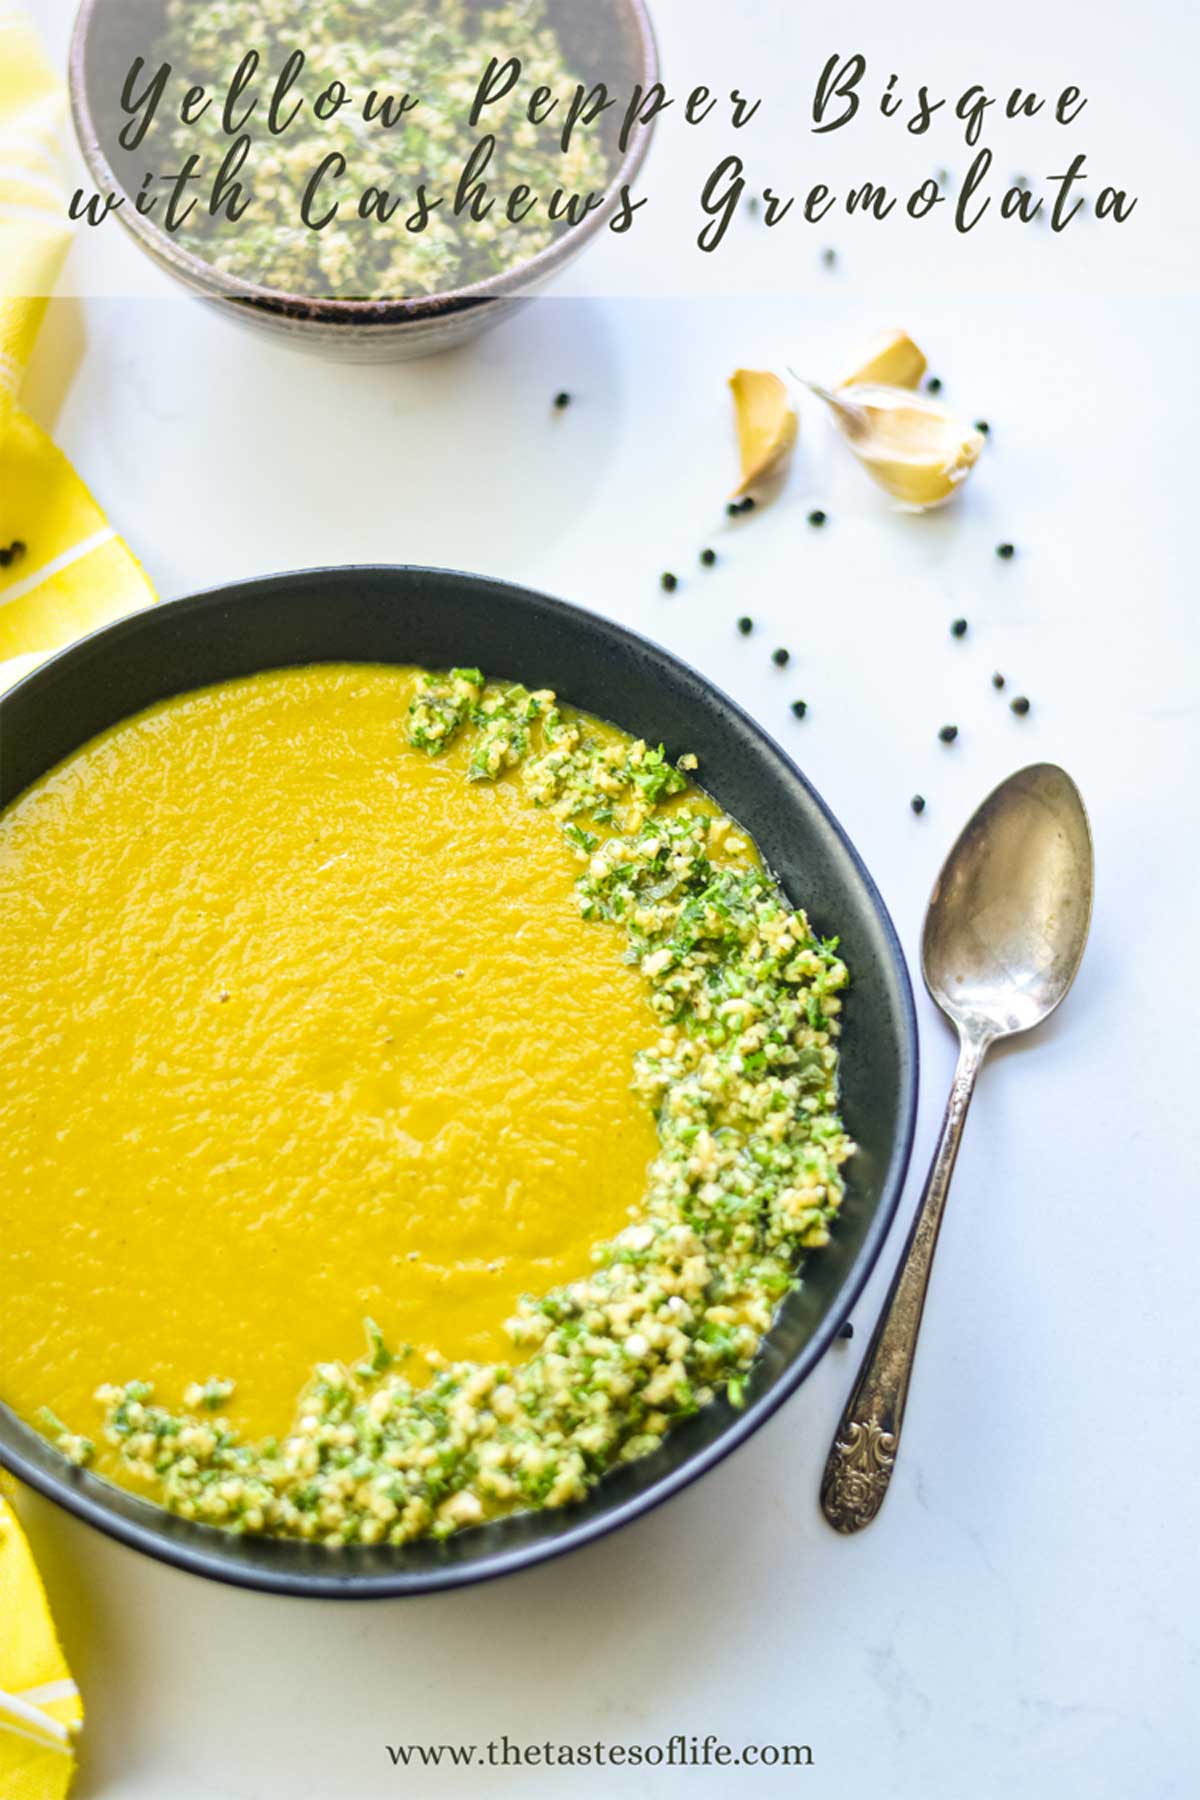 The Ultimate Comfort Food: Creamy Yellow Pepper Bisque and Cashews Gremolata